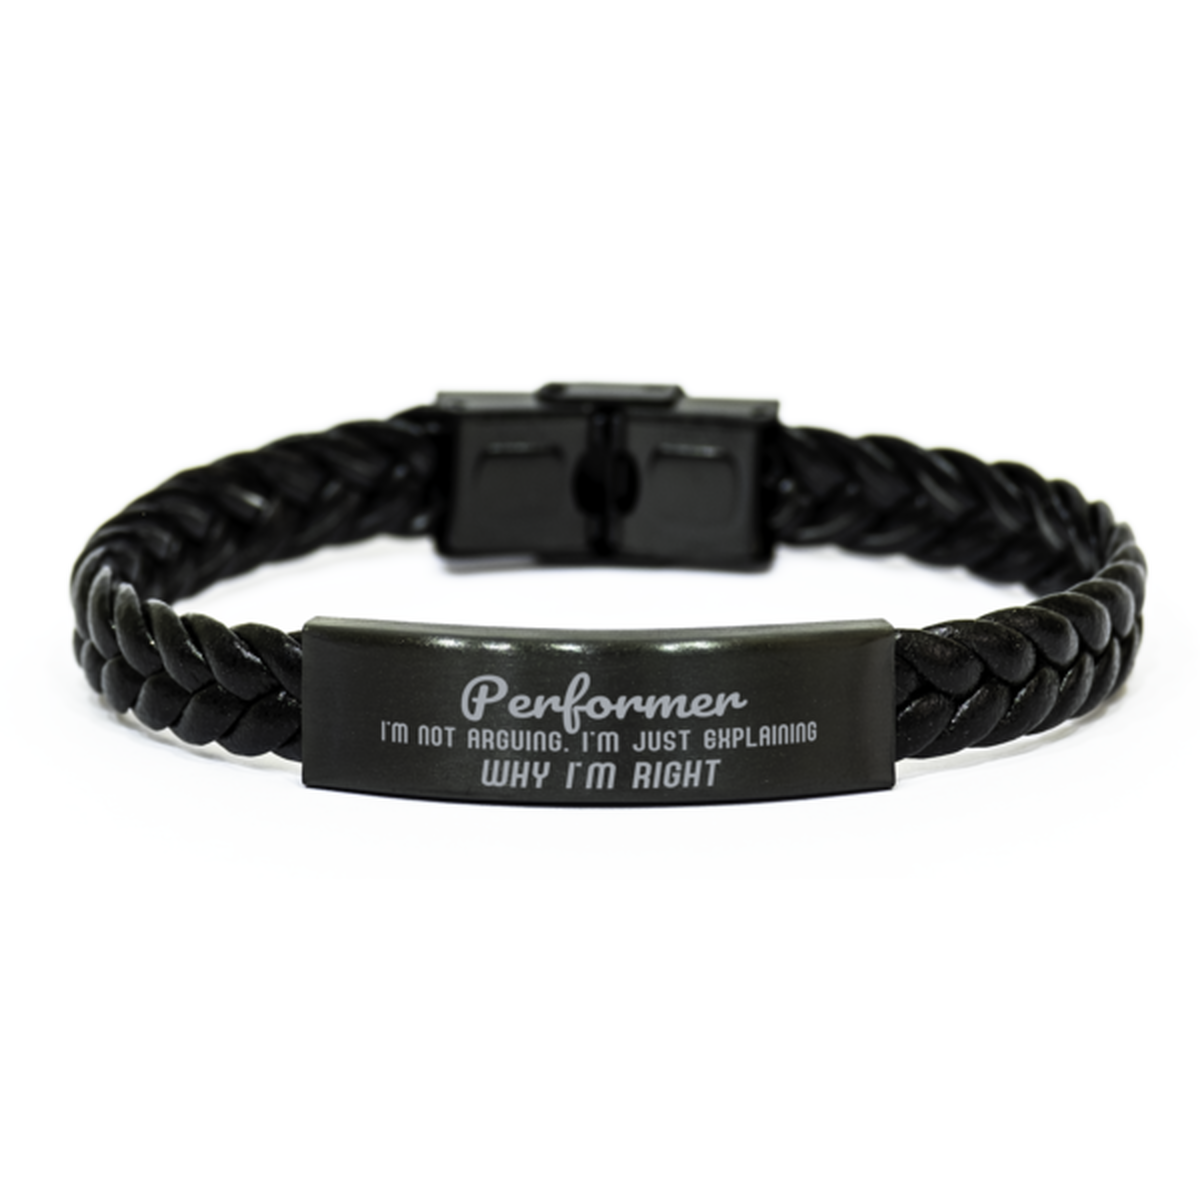 Performer I'm not Arguing. I'm Just Explaining Why I'm RIGHT Braided Leather Bracelet, Graduation Birthday Christmas Performer Gifts For Performer Funny Saying Quote Present for Men Women Coworker